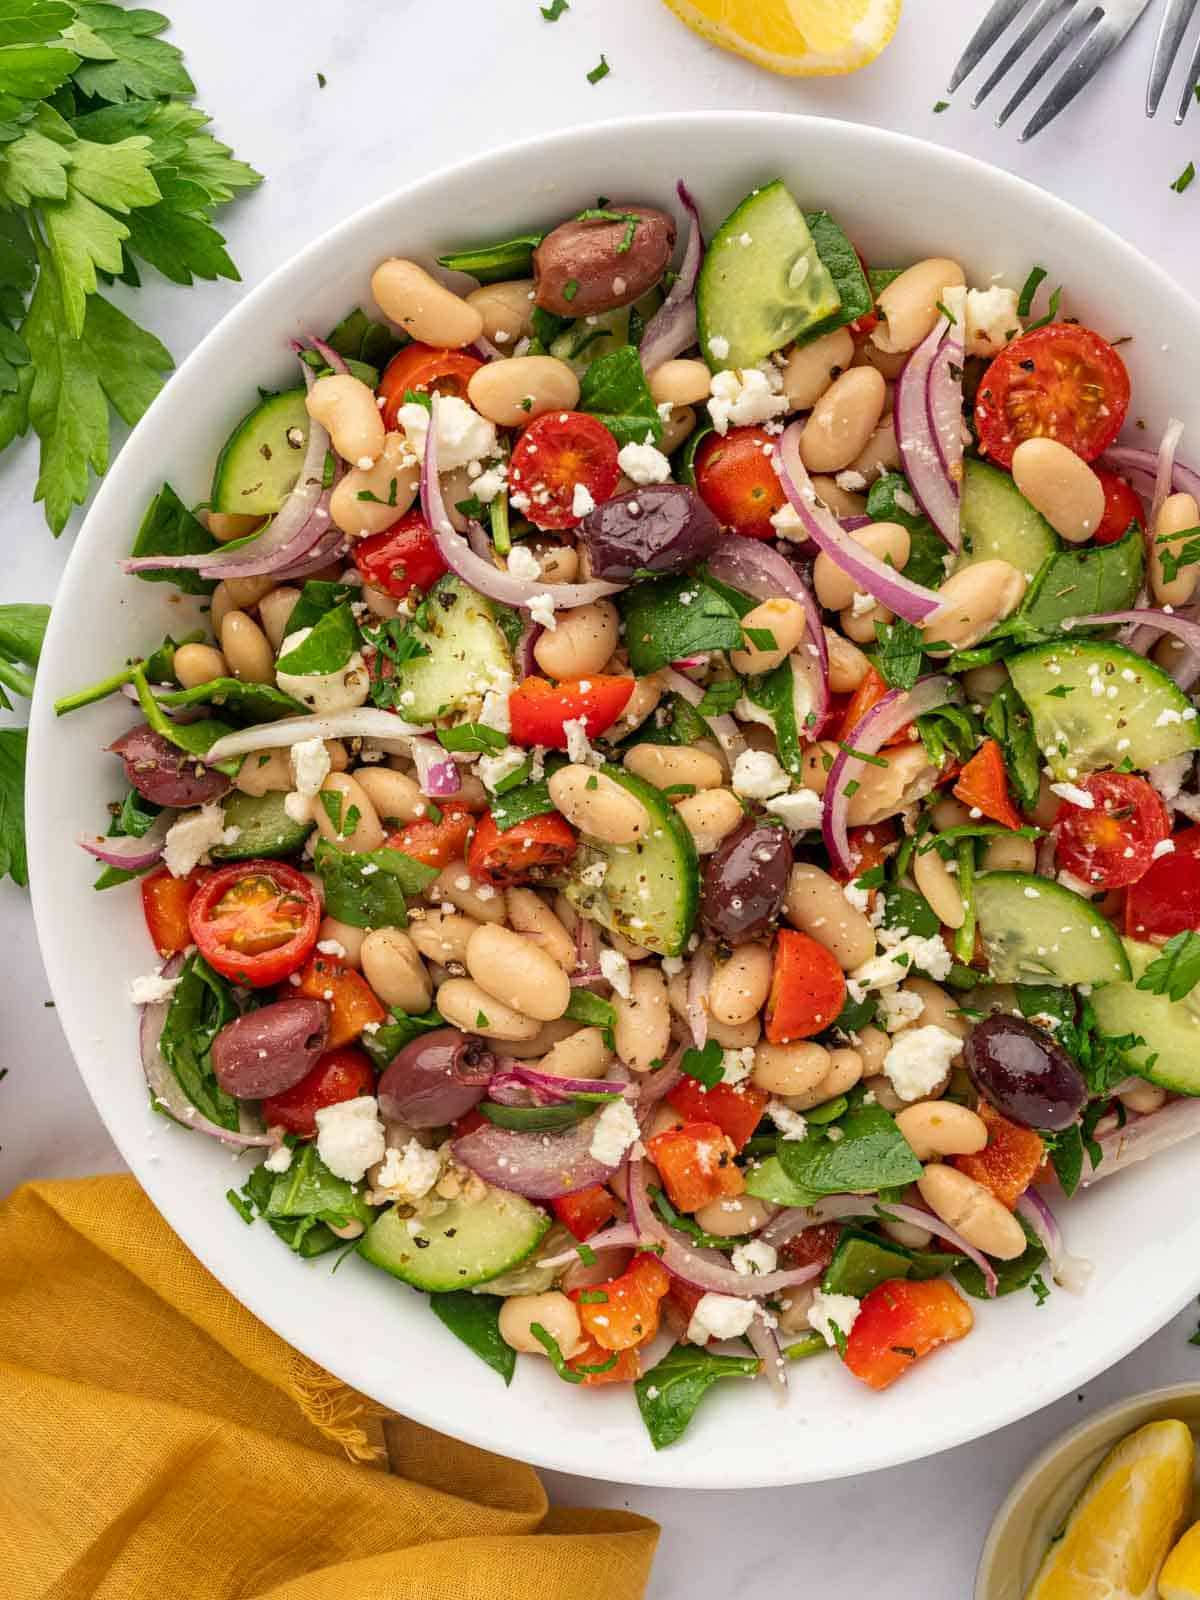 A large bowl of Mediterranean salad with beans and veggies.